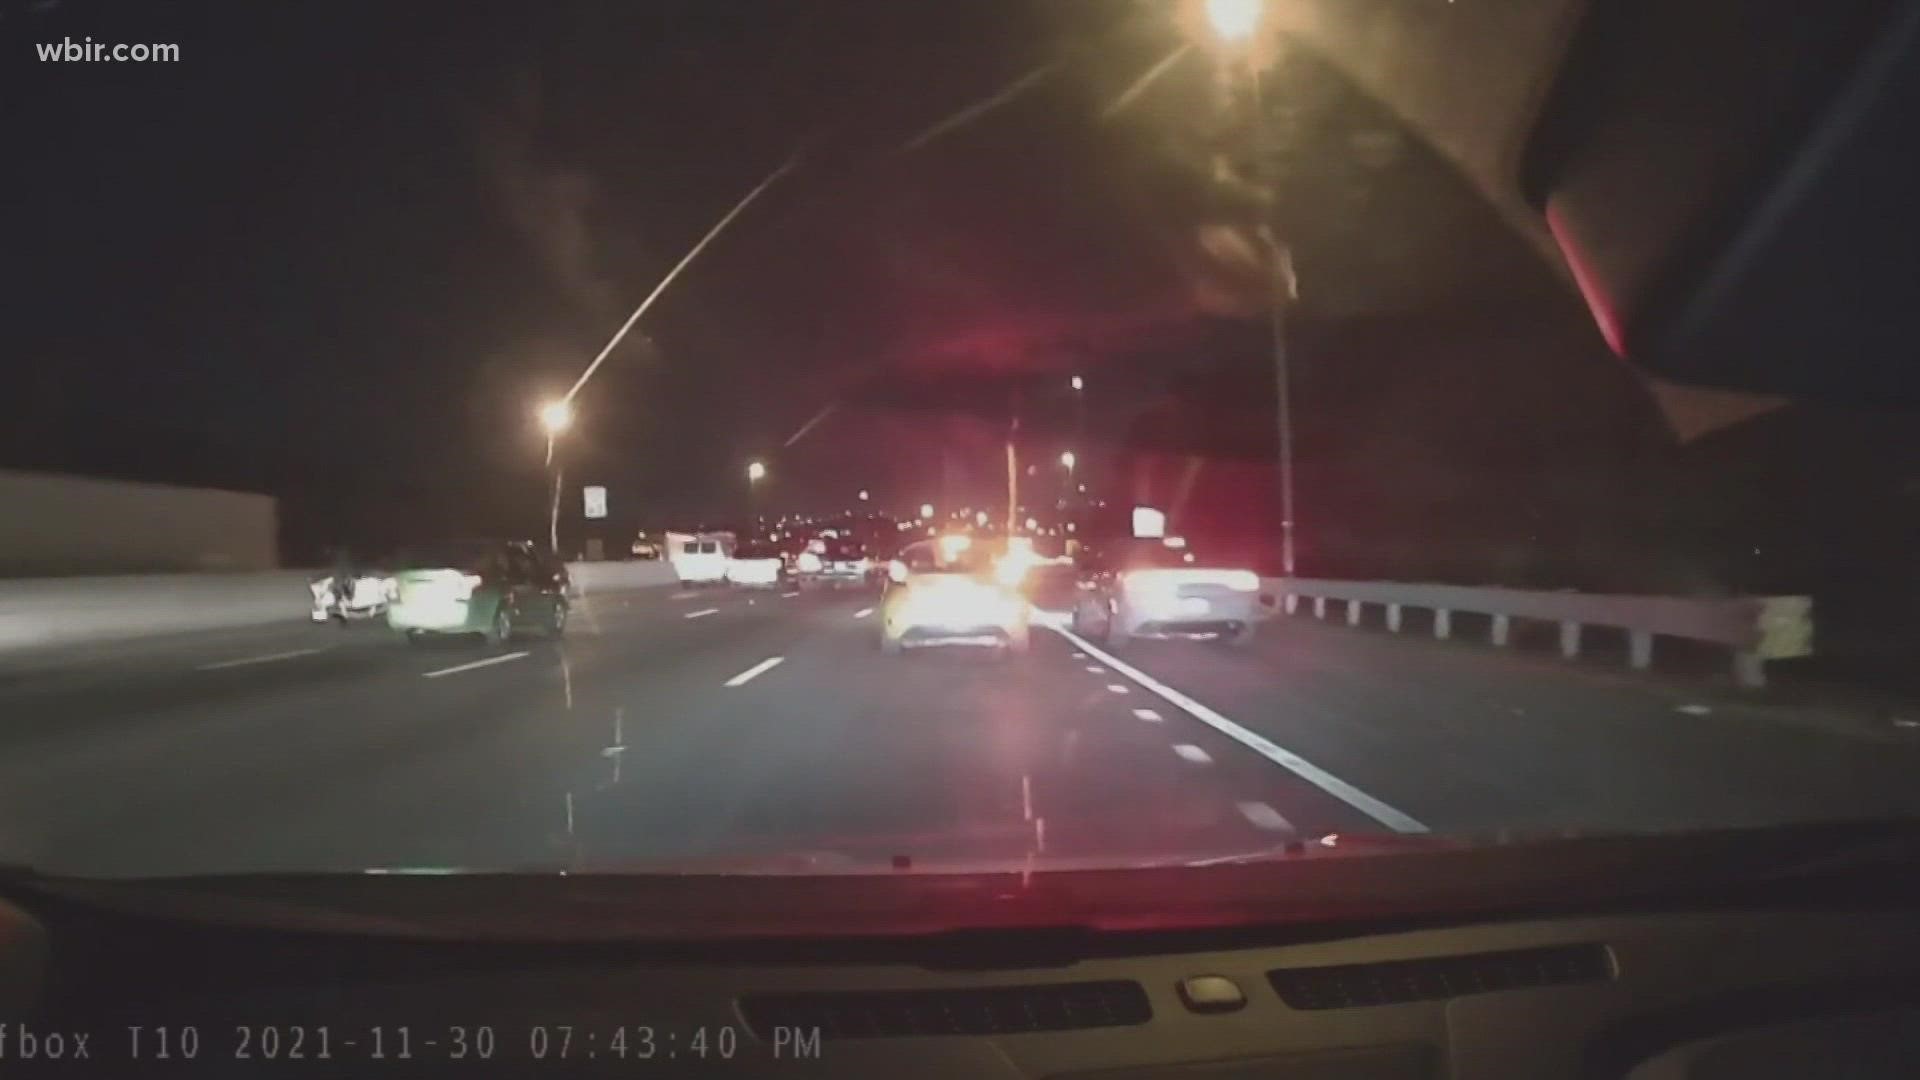 The man's dashcam caught part of the incident involving a silver Dodge Charger.